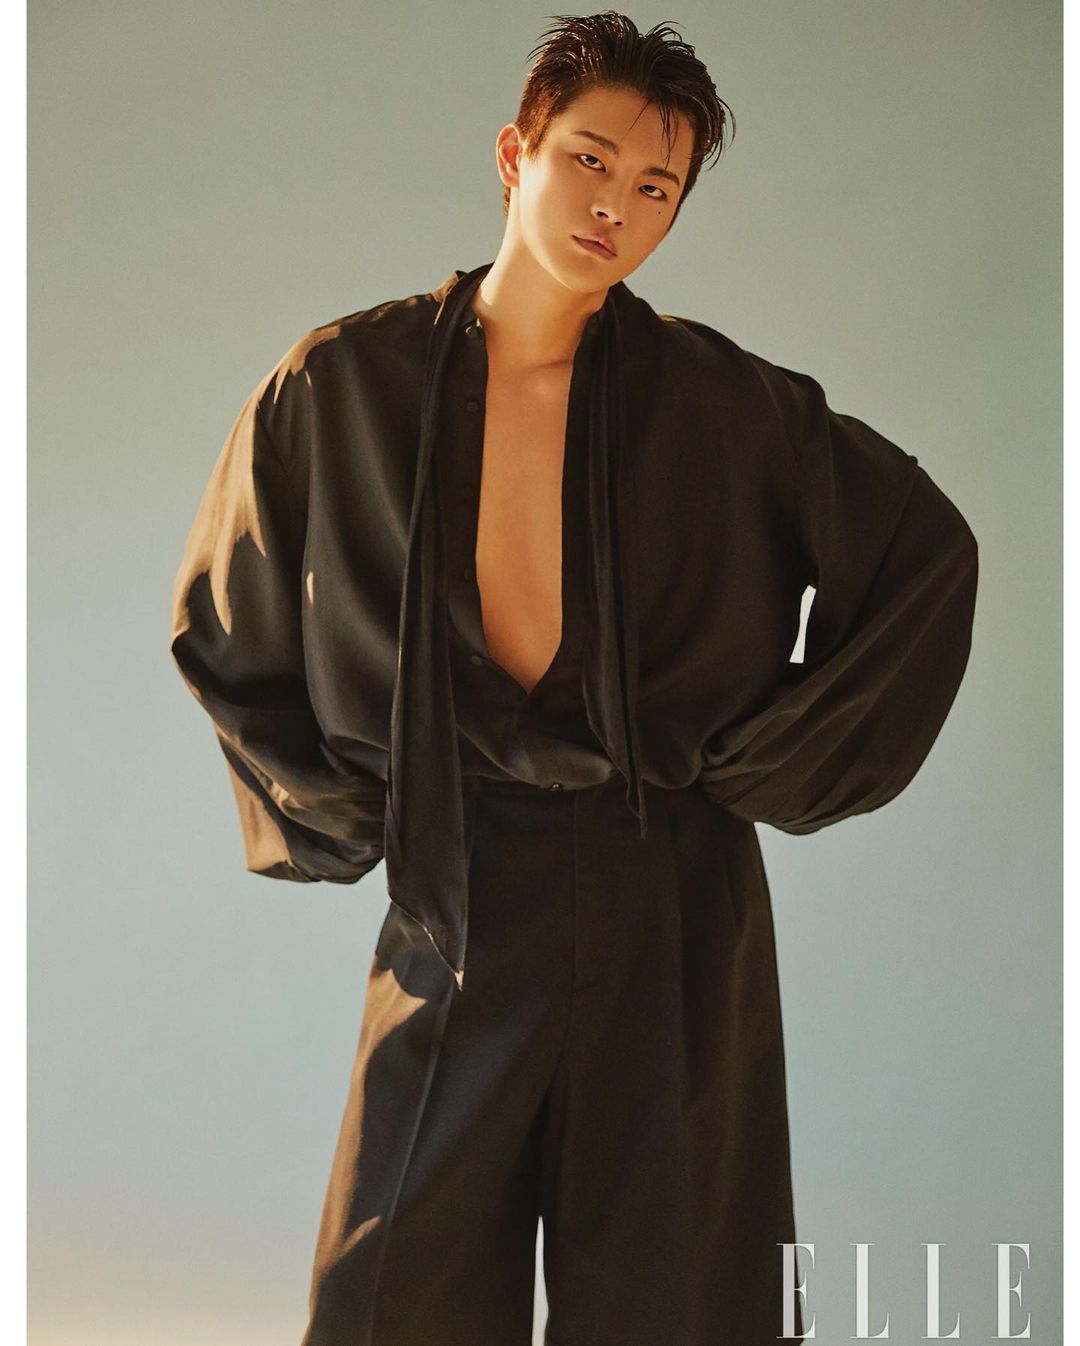 seo-in-guk-gives-glimpses-into-upcoming-drama-doom-at-your-service-in-new-pictorial-for-elle-korea